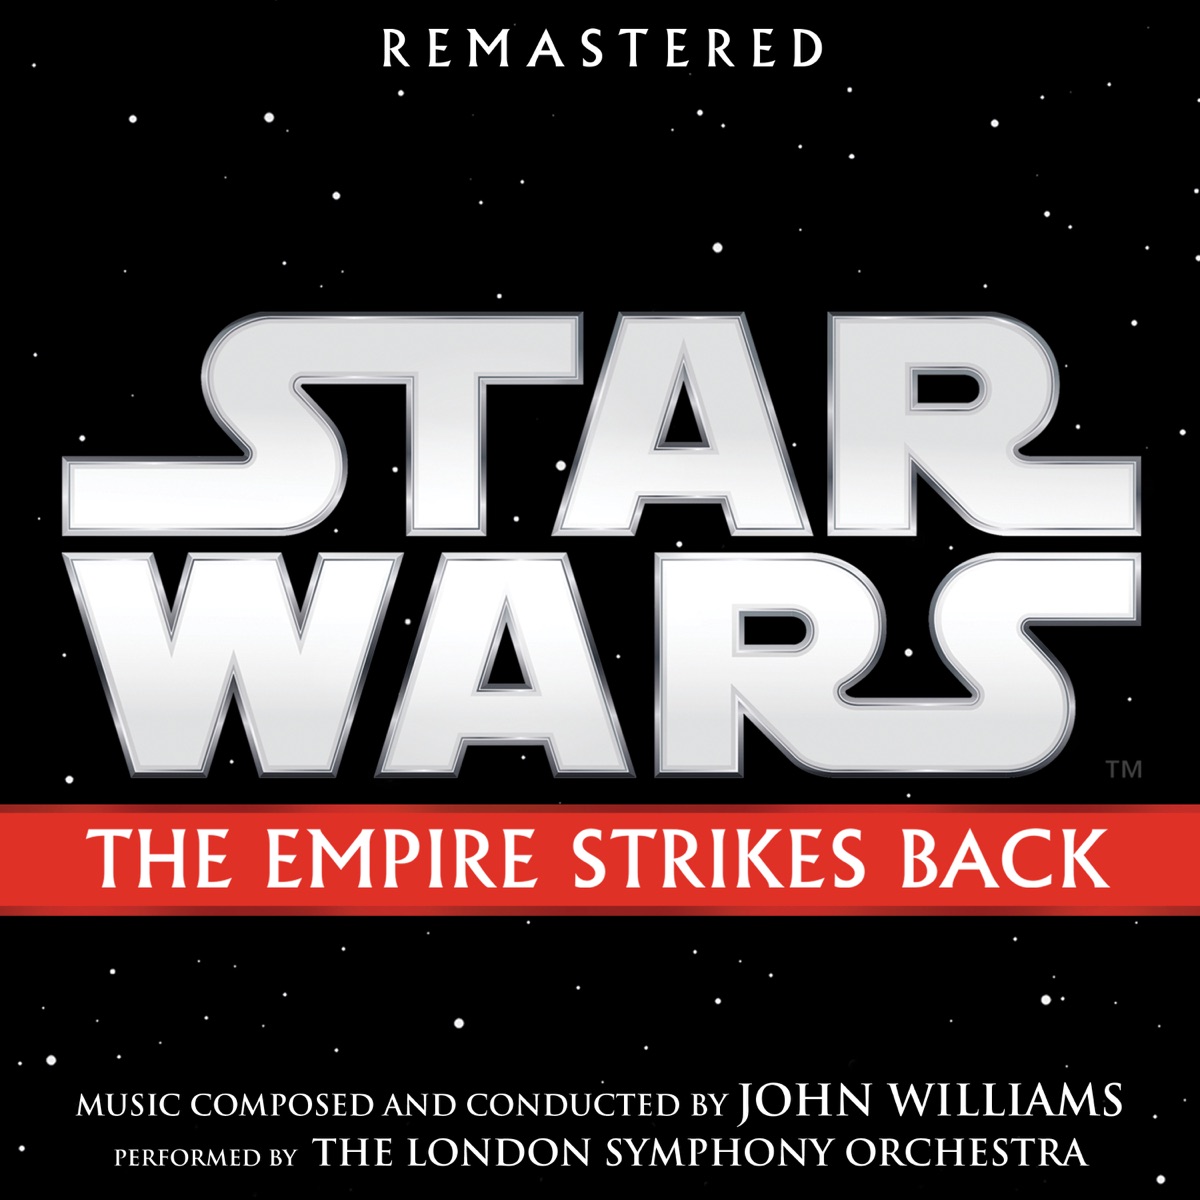 Star Wars: A New Hope (Original Motion Picture Score) by John Williams &  London Symphony Orchestra on Apple Music